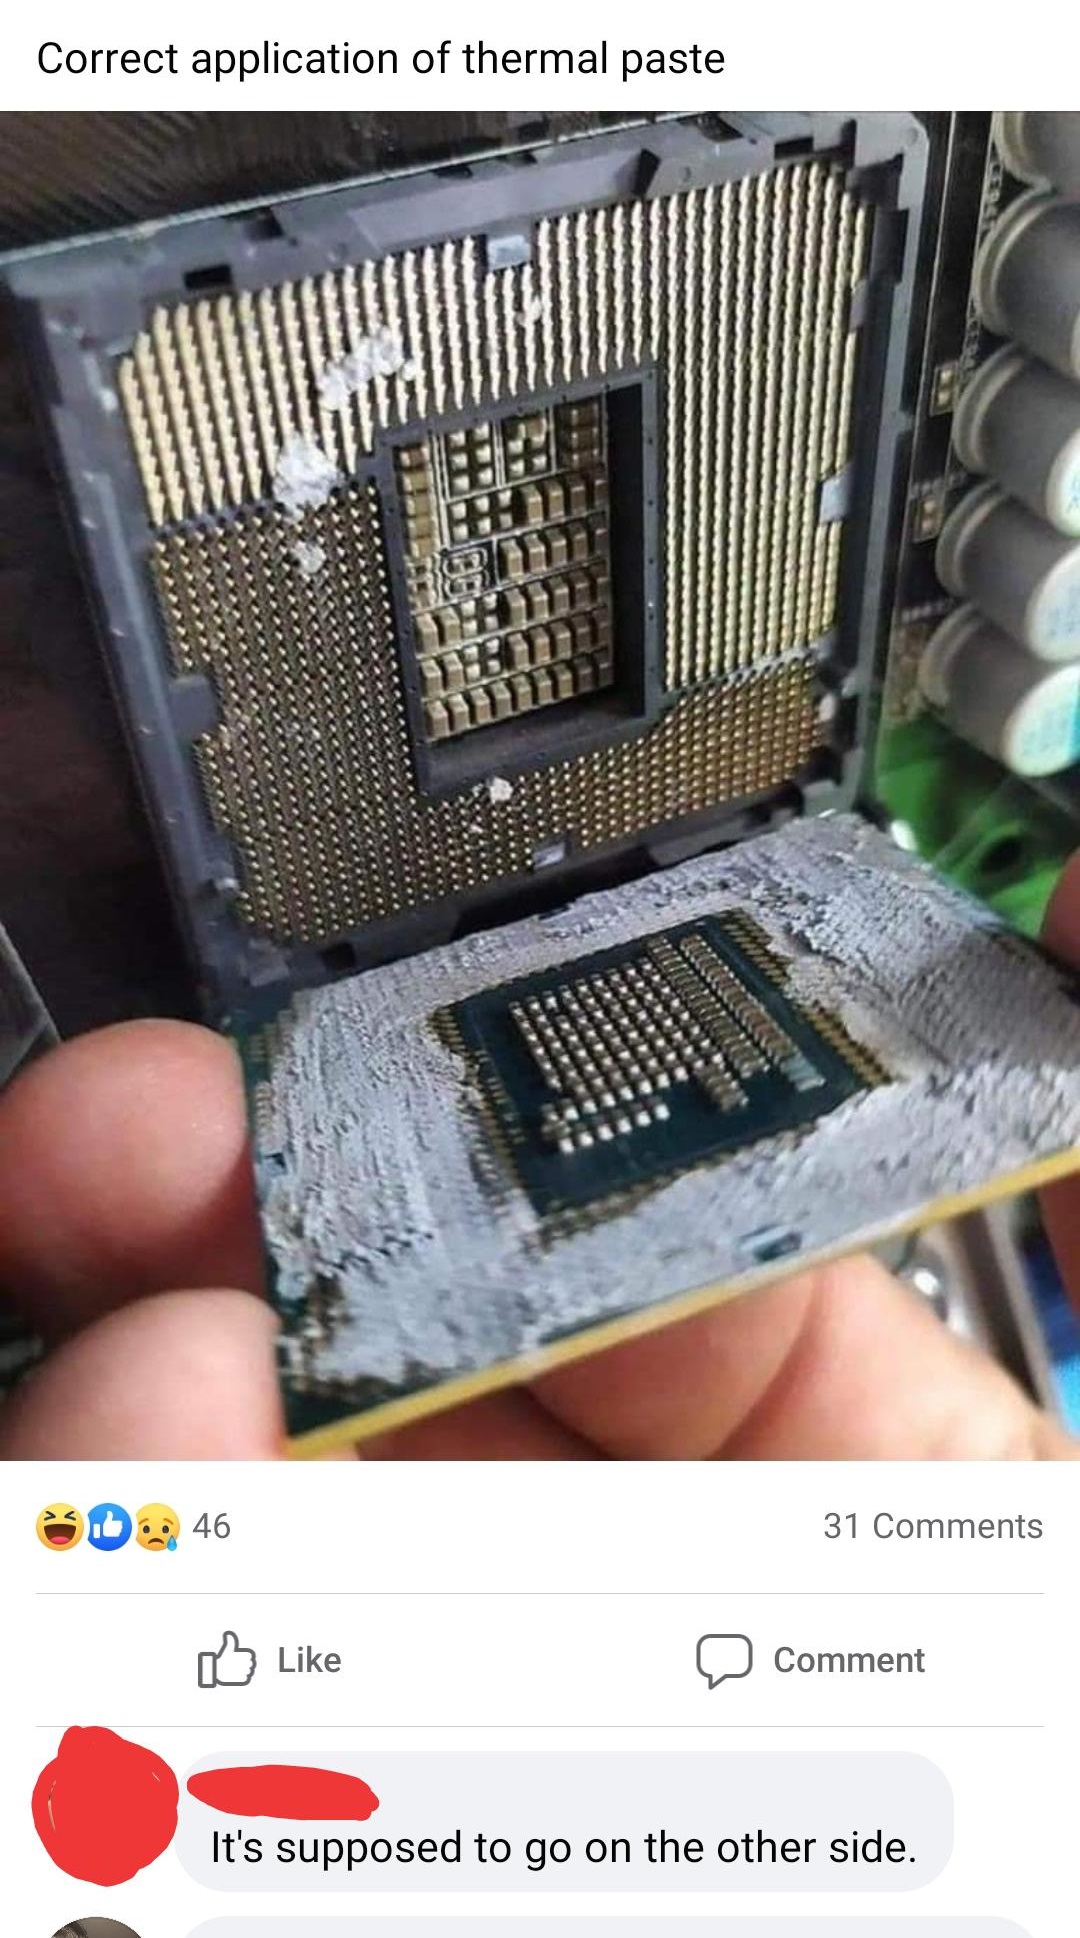 electronics - Correct application of thermal paste 31 Comment It's supposed to go on the other side,